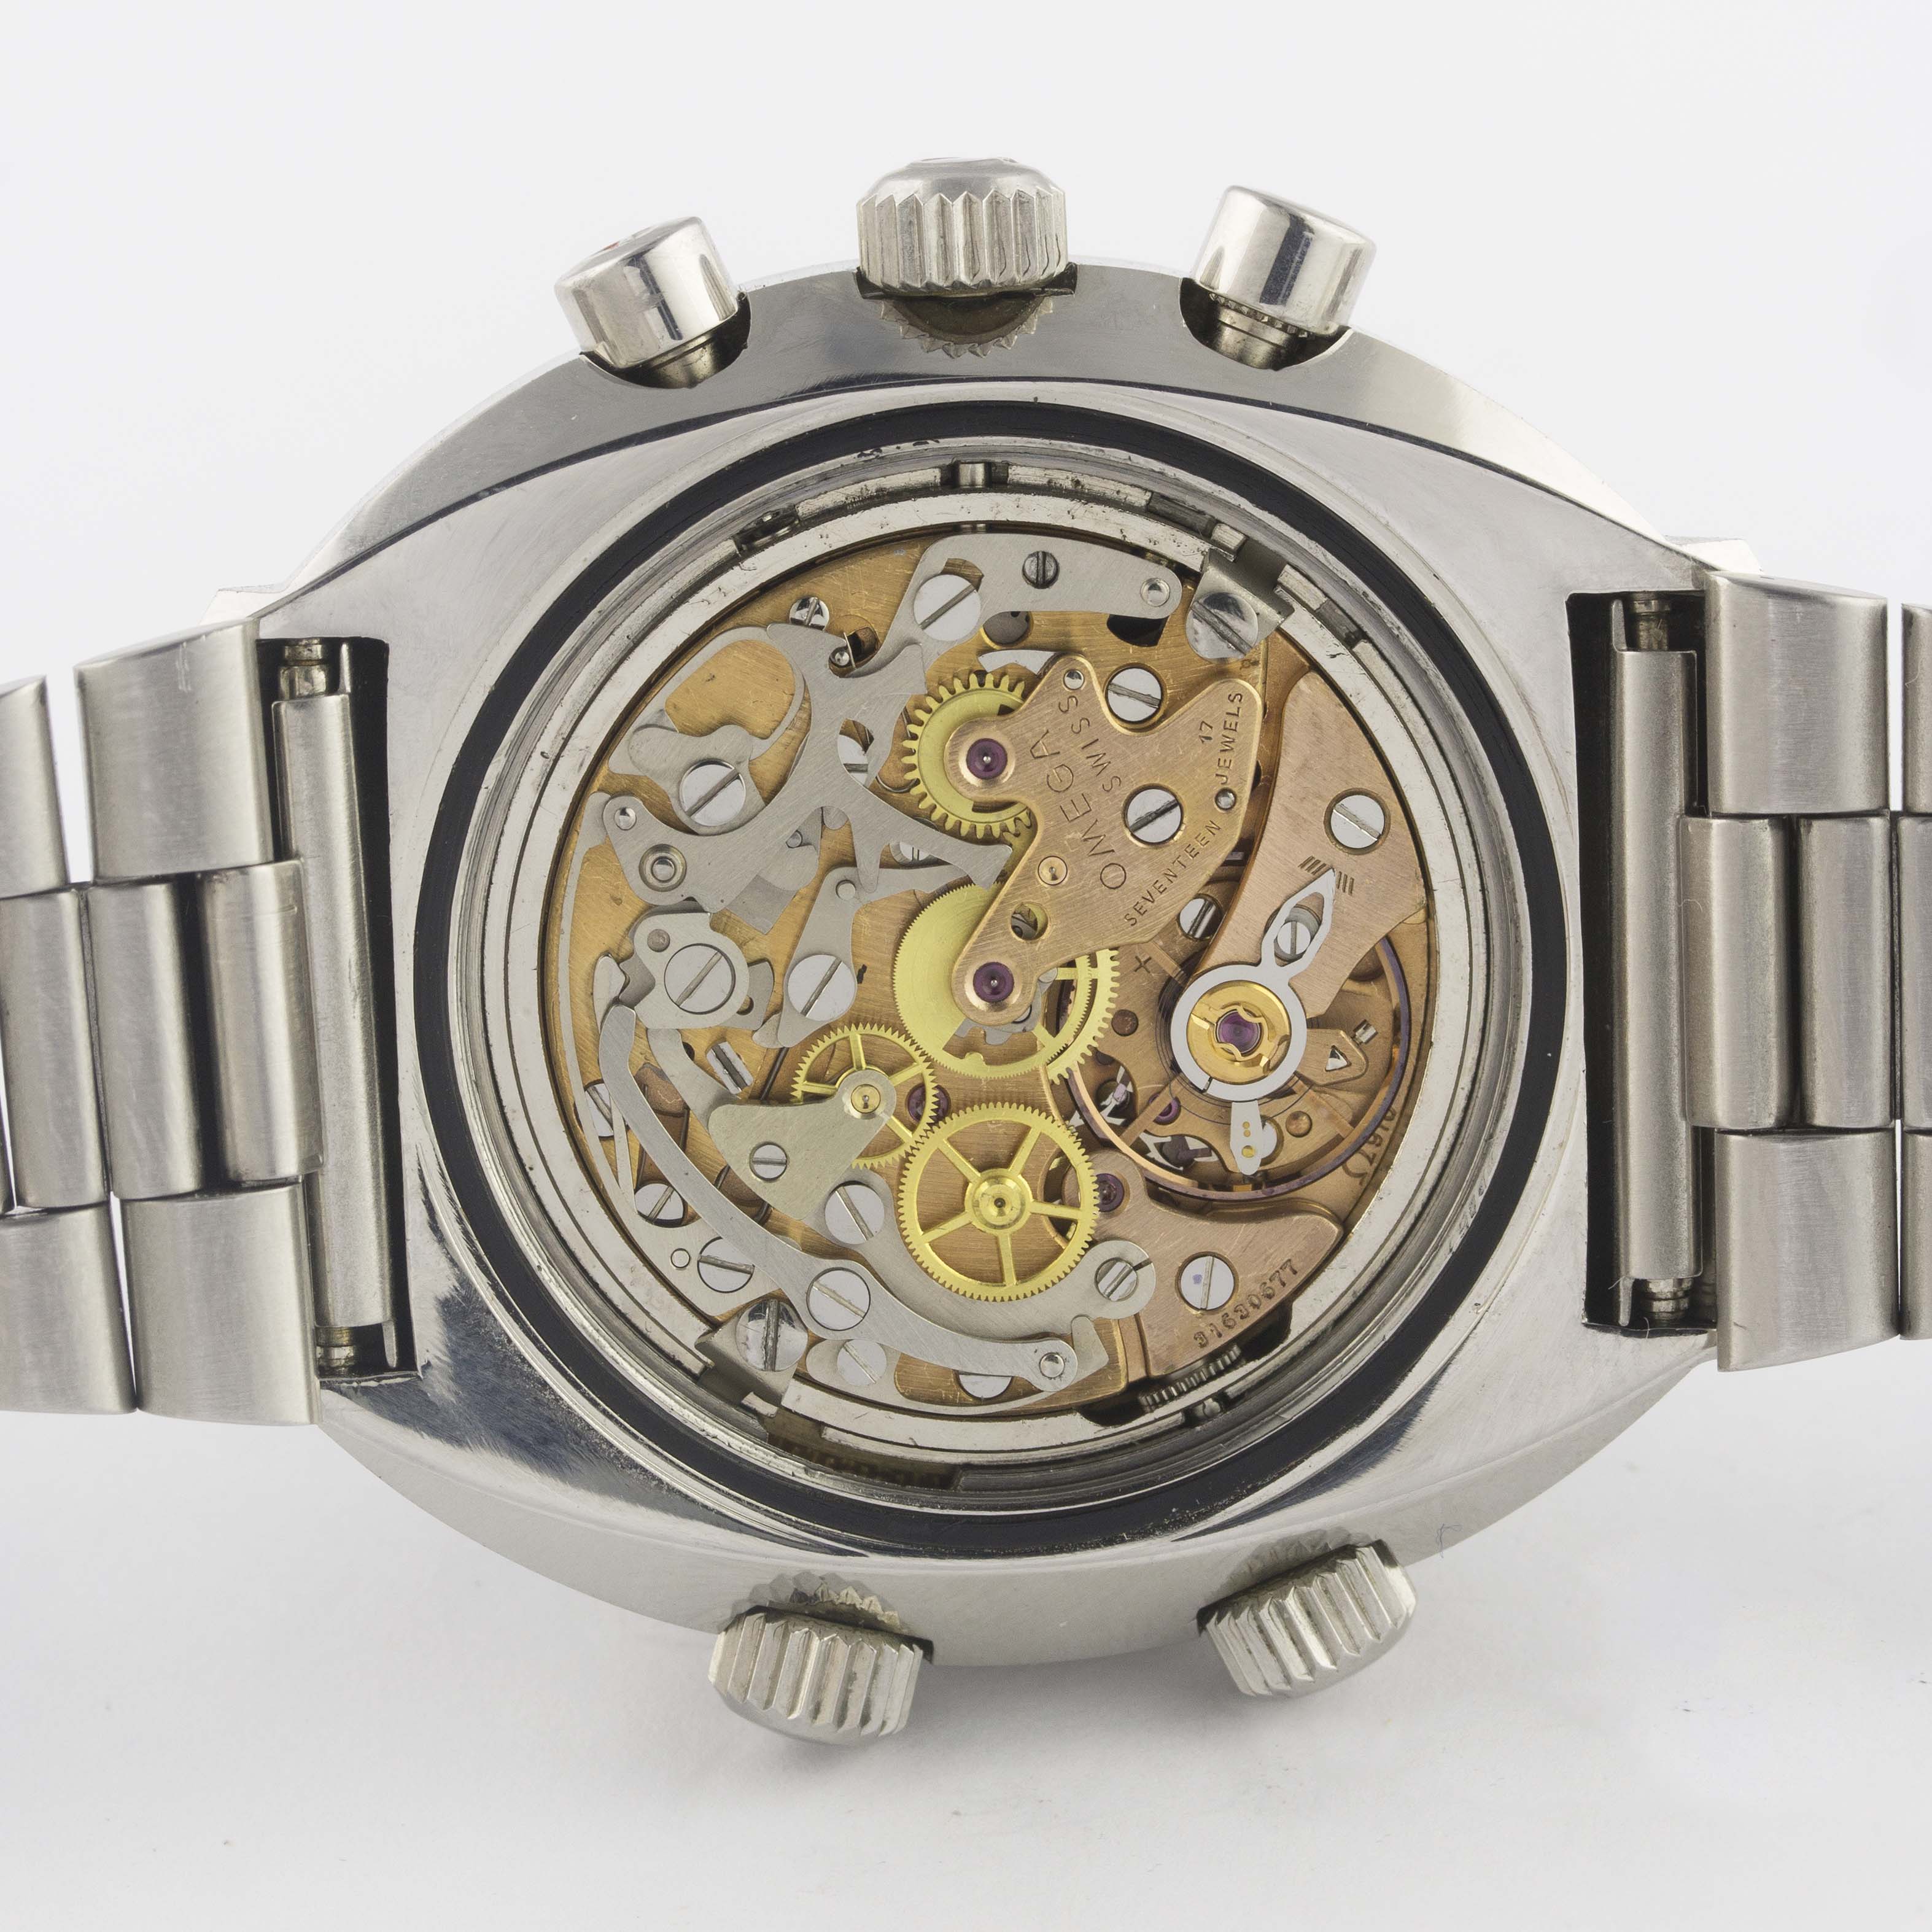 A GENTLEMAN'S STAINLESS STEEL OMEGA FLIGHTMASTER CHRONOGRAPH BRACELET WATCH CIRCA 1972, REF. 145.013 - Image 8 of 11